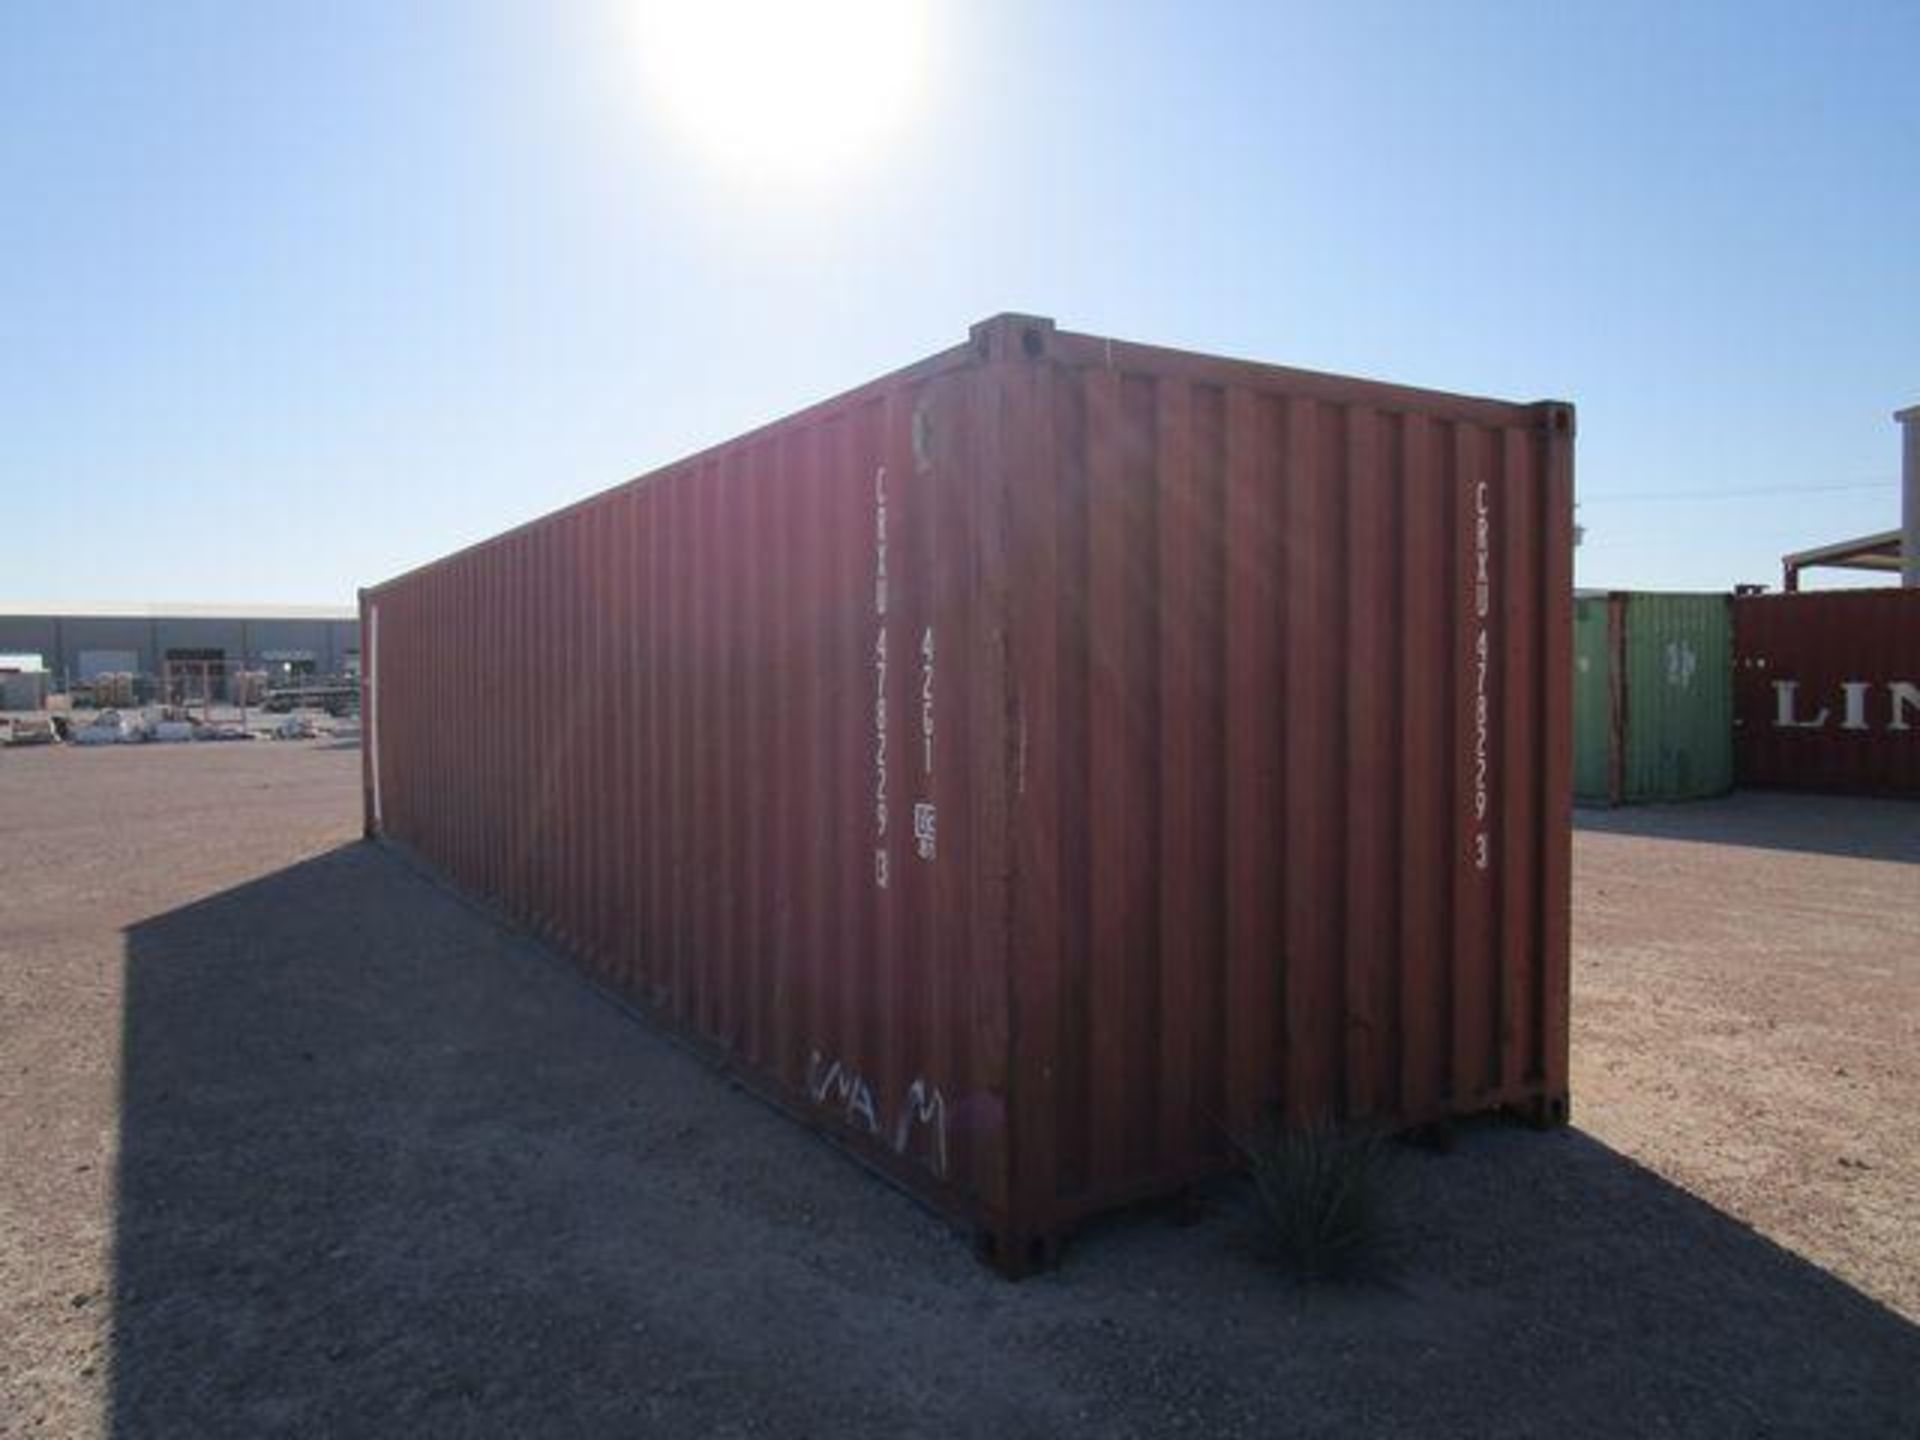 Cronos HCG-10-400A 40' Storage Container - Image 4 of 4